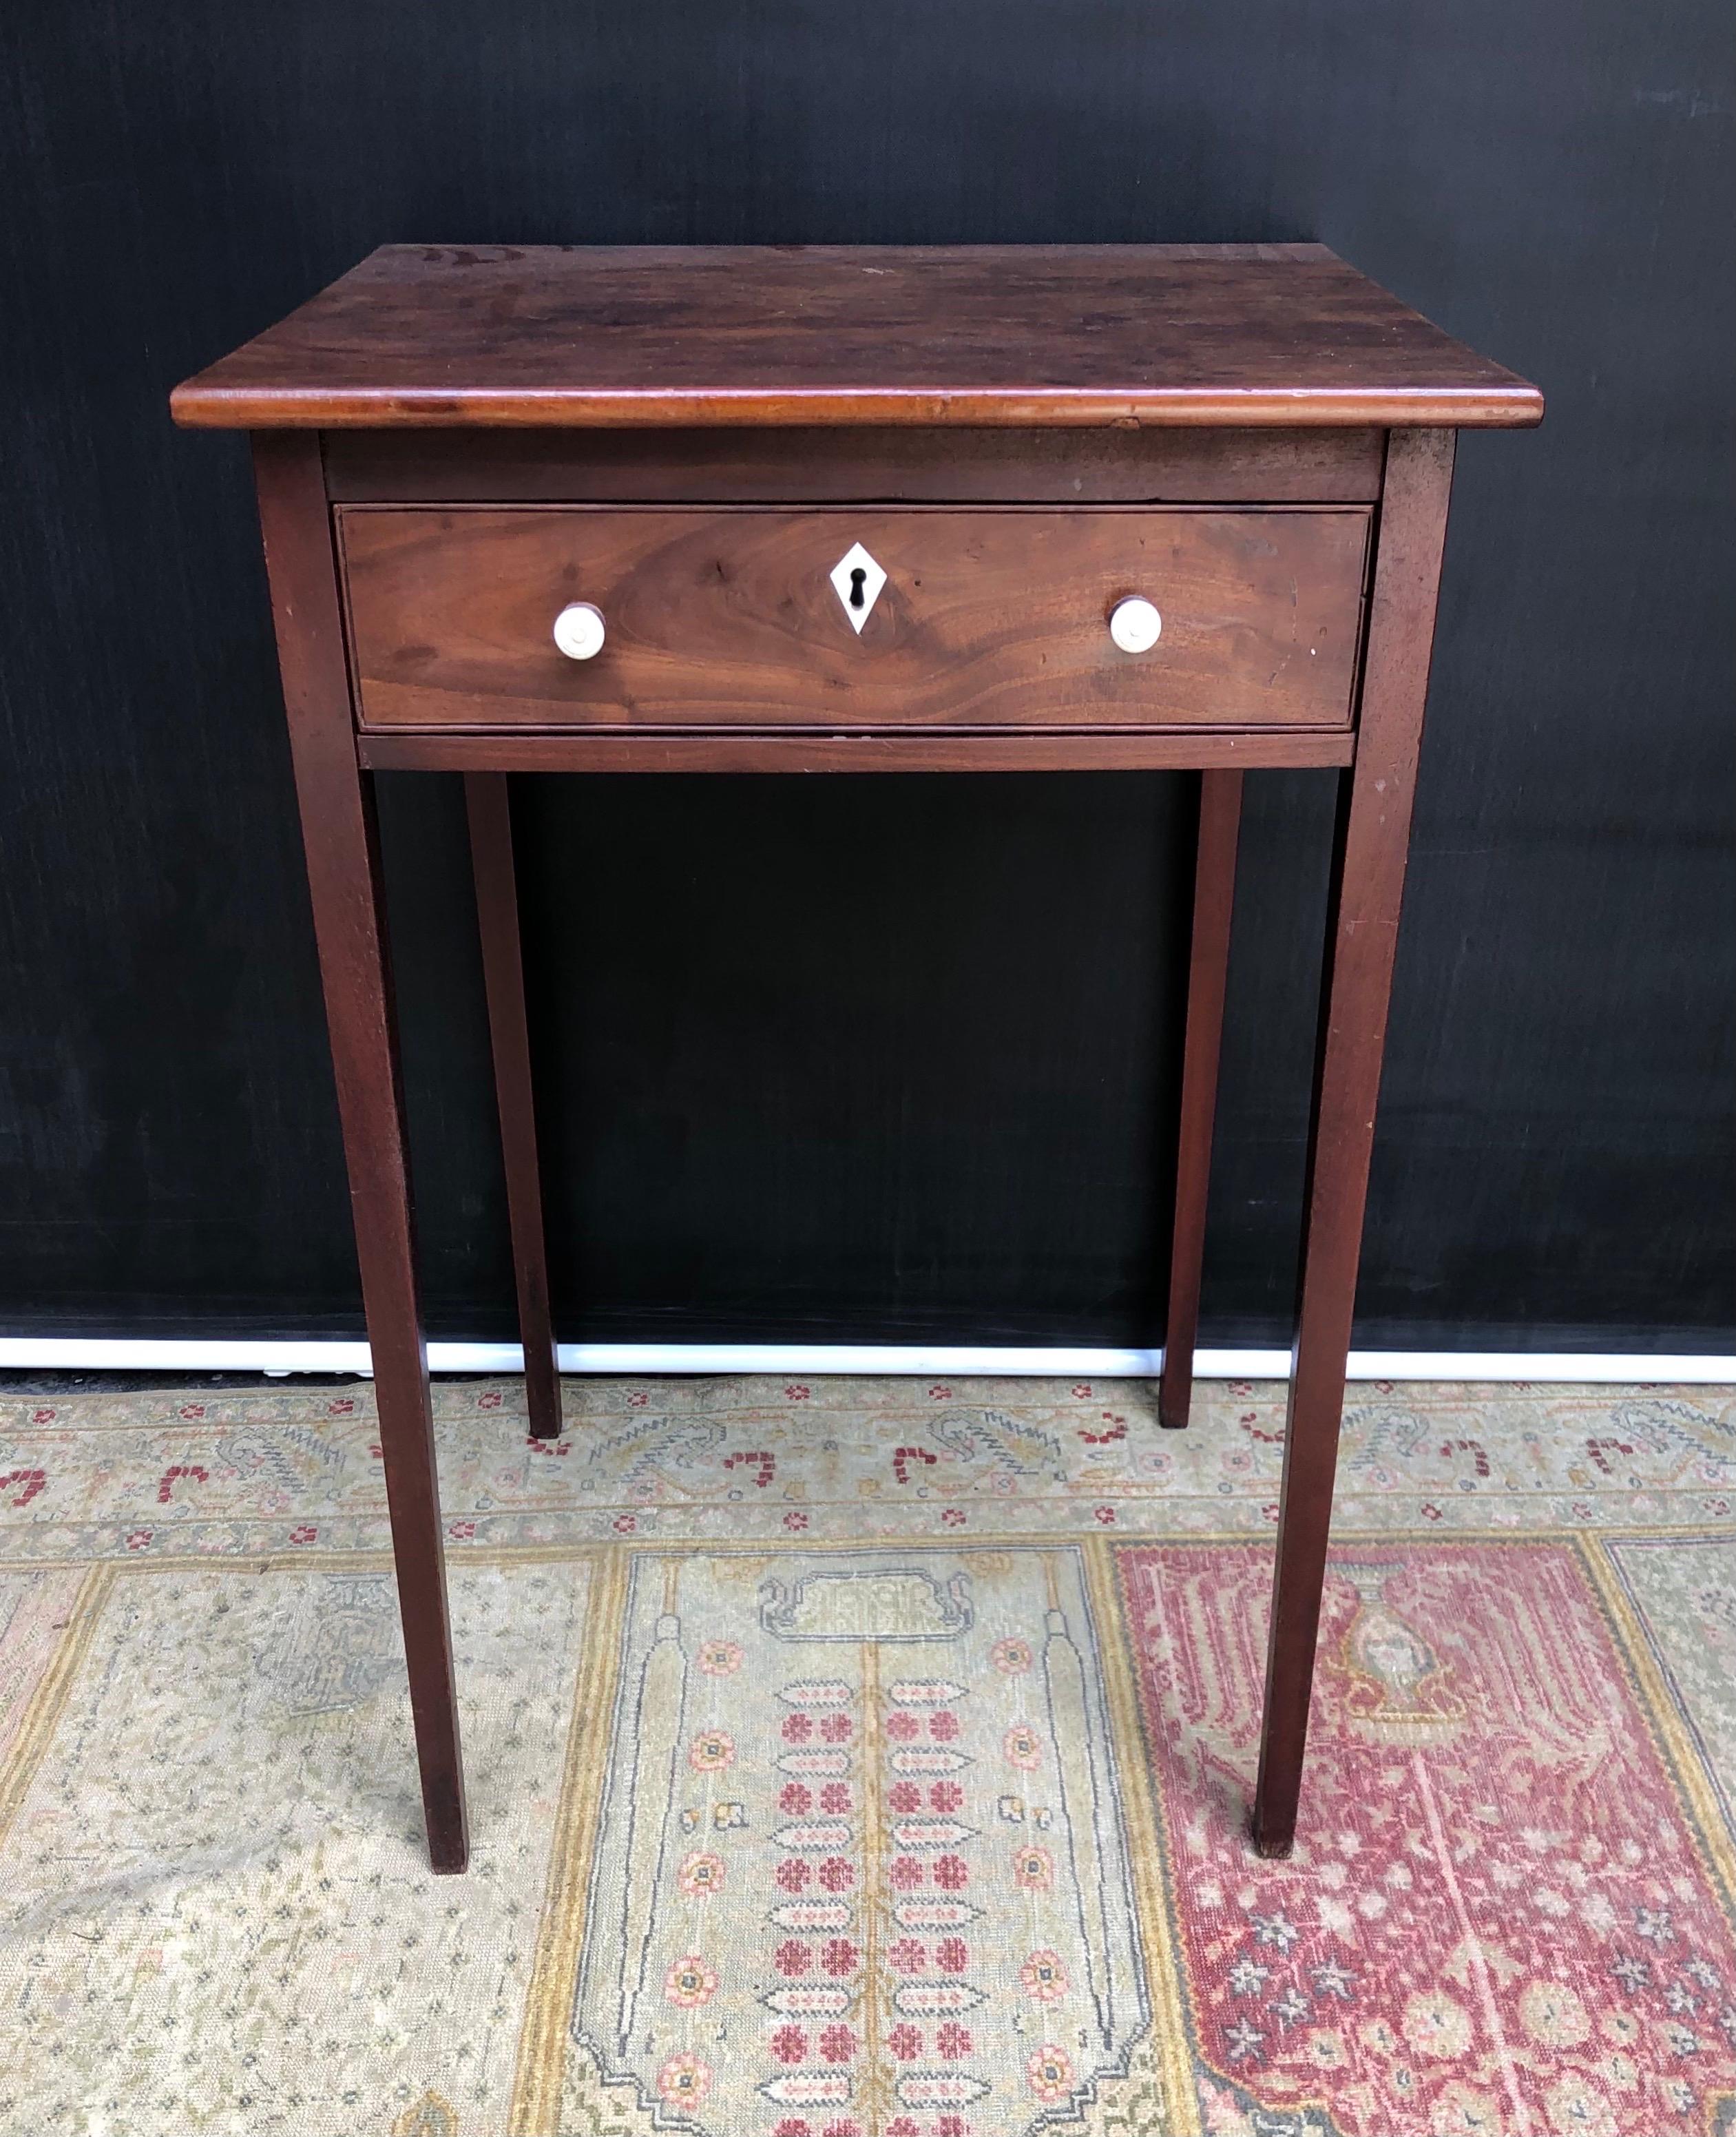  This Directoire or Consulate Style solid Mahogany One Drawer Work-stand / Table was made in the Danish West Indies on the Island of Saint Croix in the Late Eighteenth Century.  The Saint Croix Table showcases the rich beauty of local solid mahogany